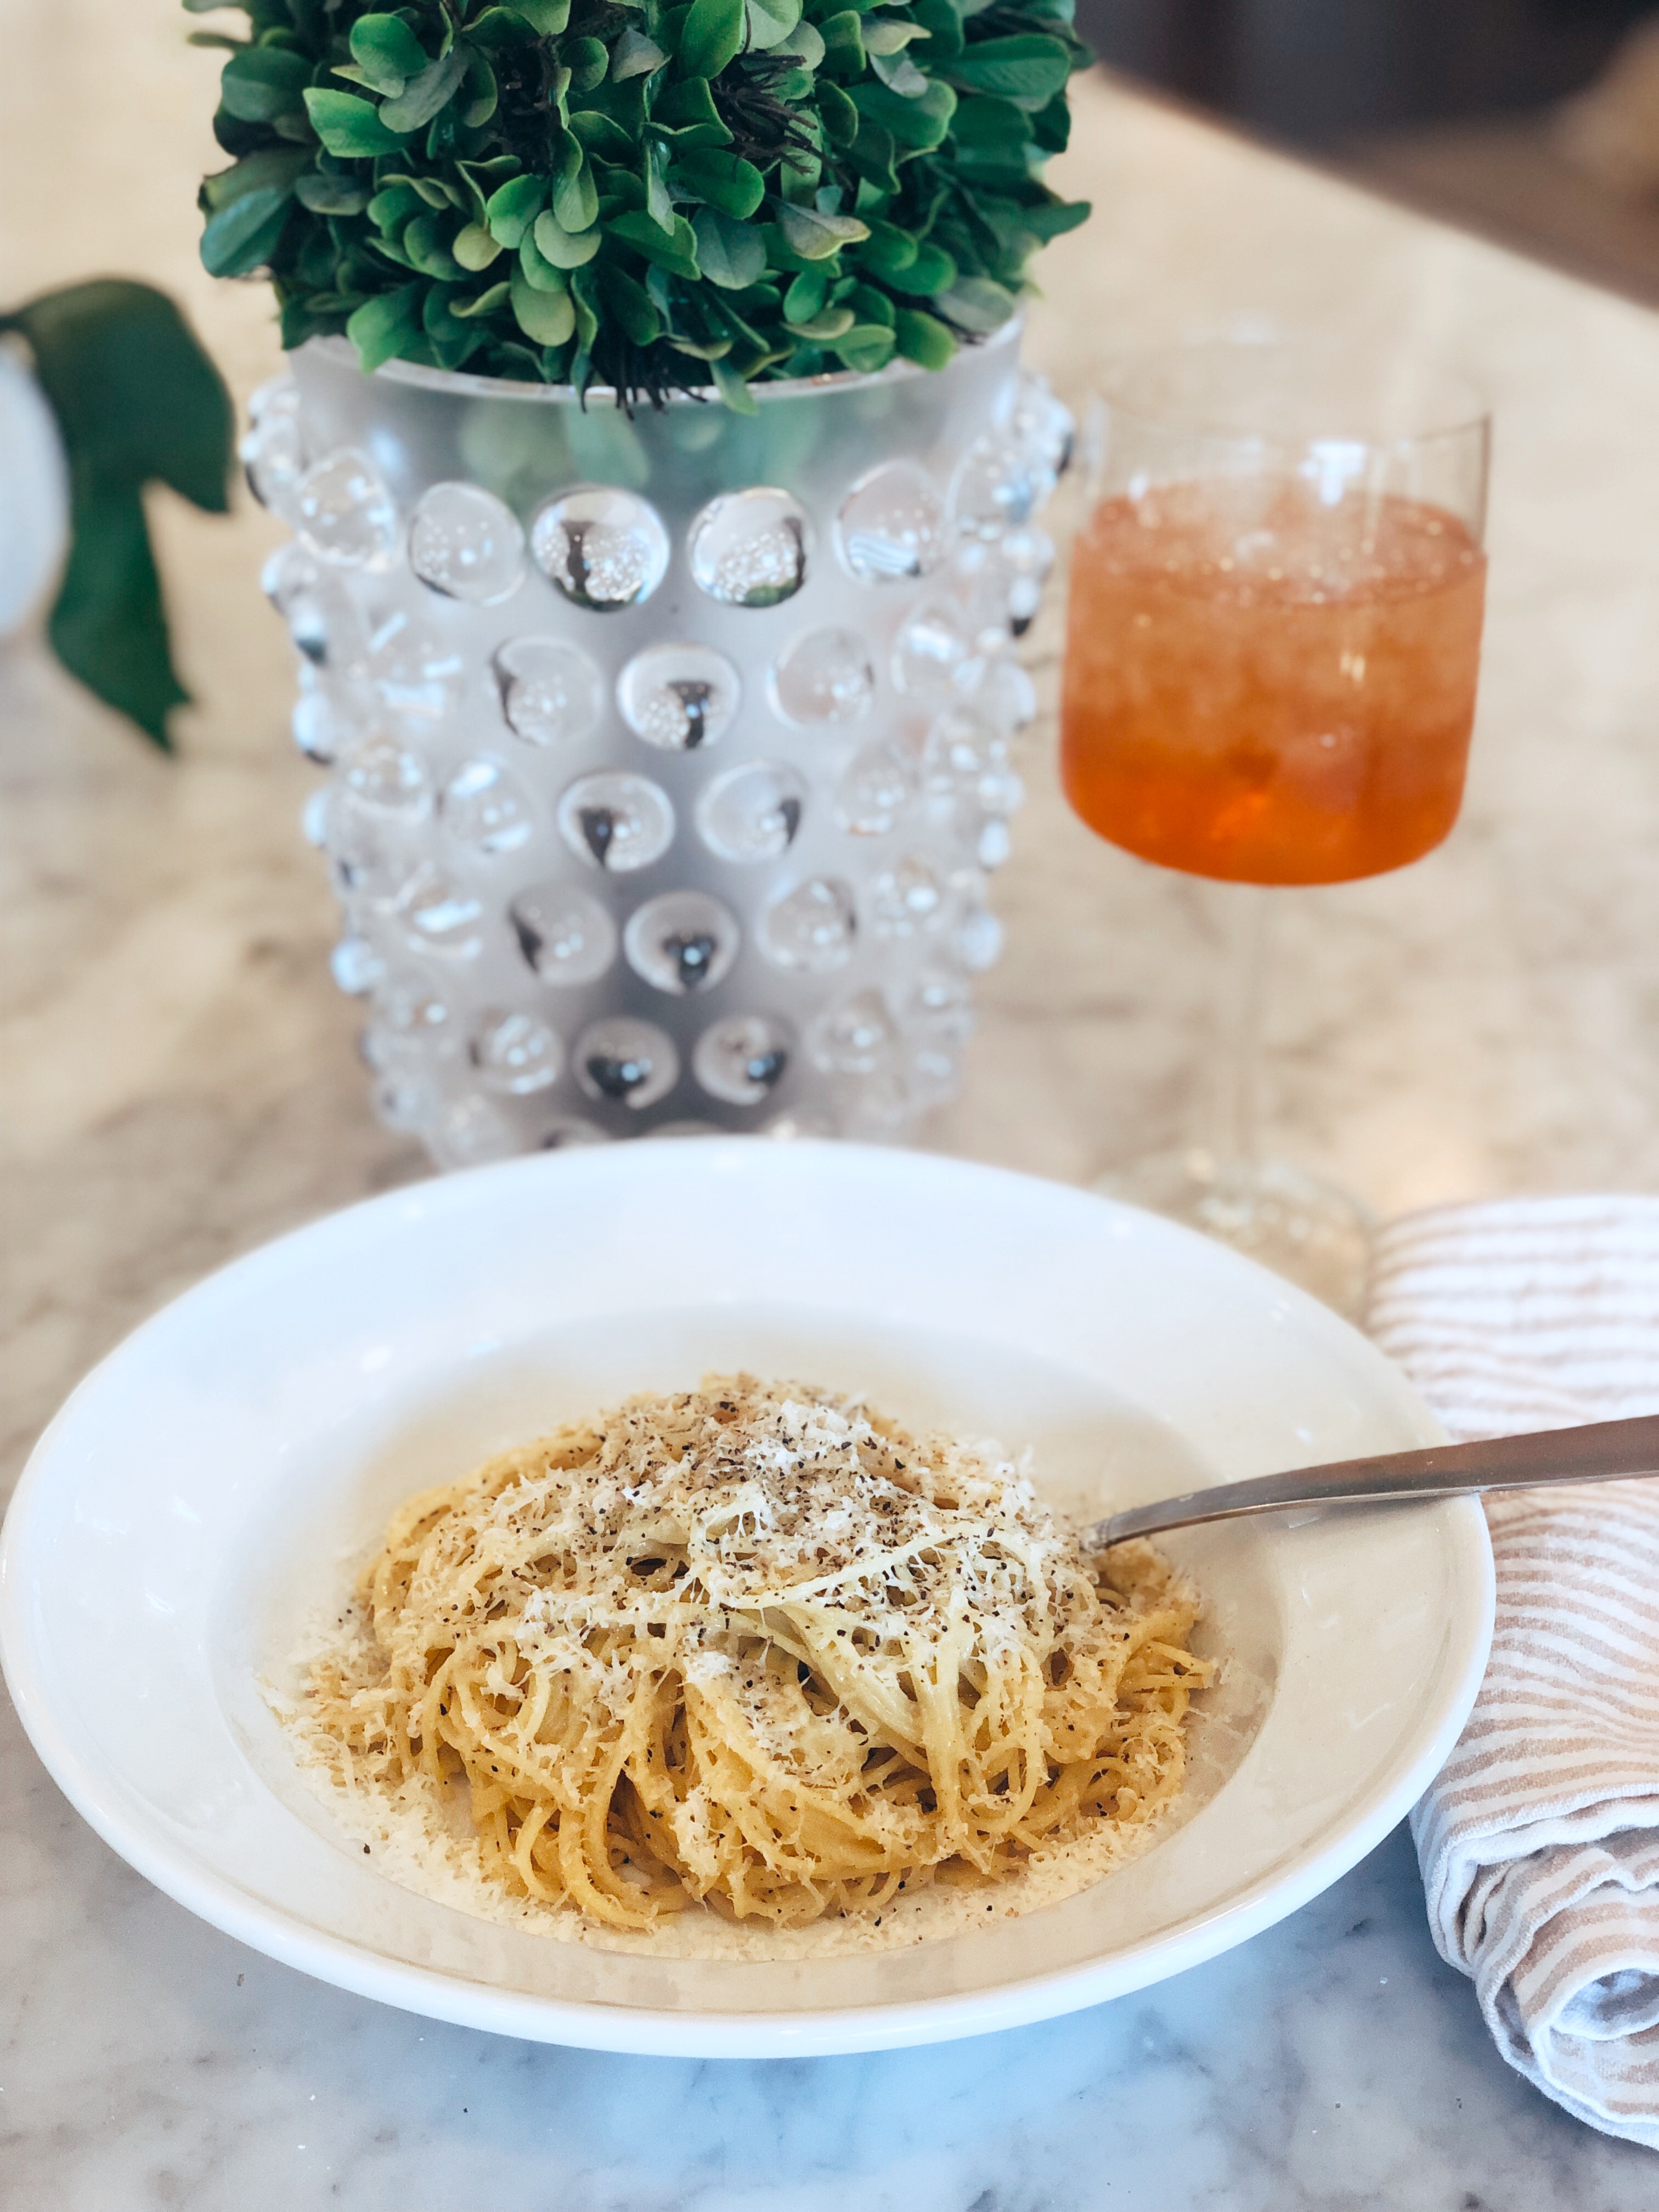 Reno, Nevada blogger, Emily Farren Wieczorek shares her journey to trying to find cacio e pepe in her city.... and then her Easy Cacio e Pepe recipe!